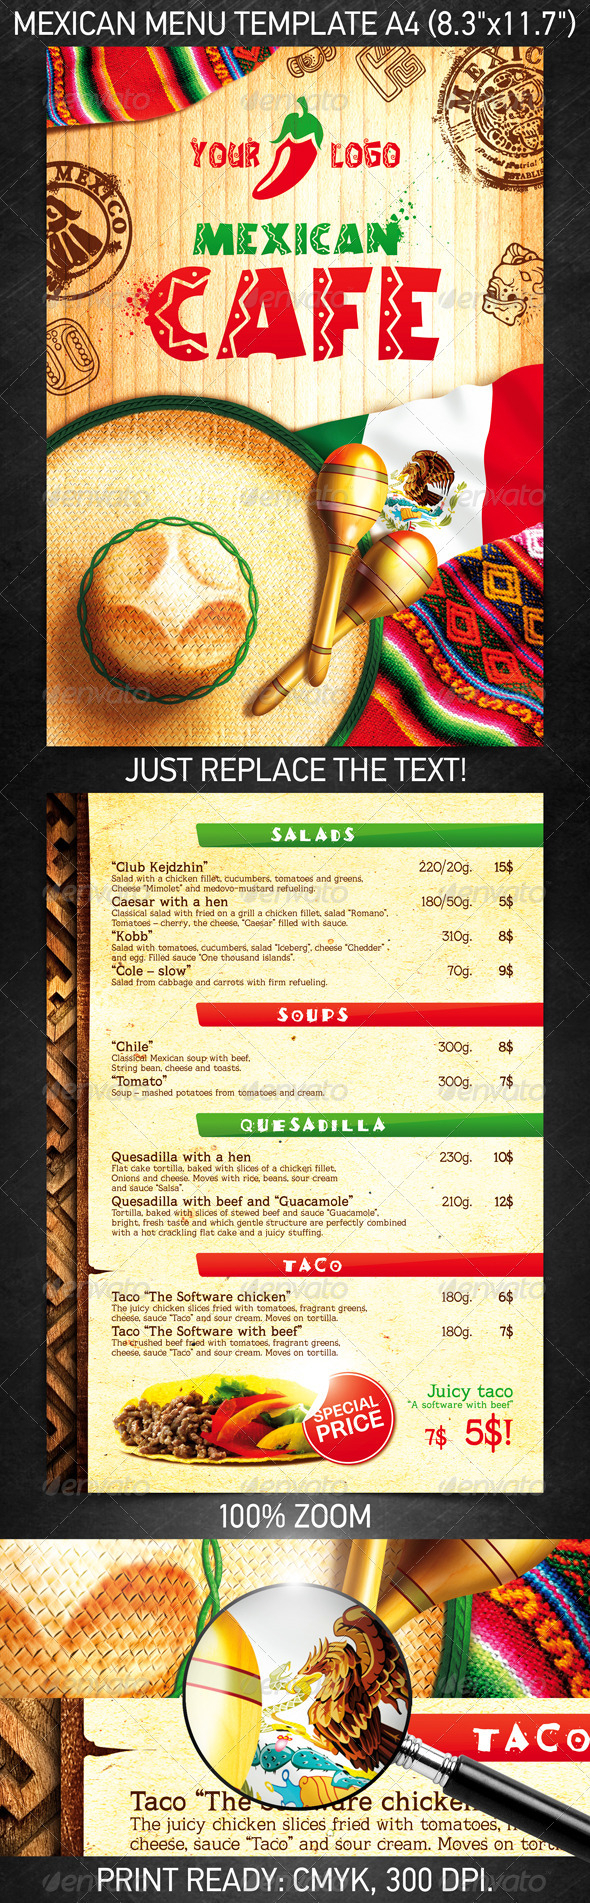 25 High Quality Restaurant Menu Design Templates – Bashooka Within Mexican Menu Template Free Download